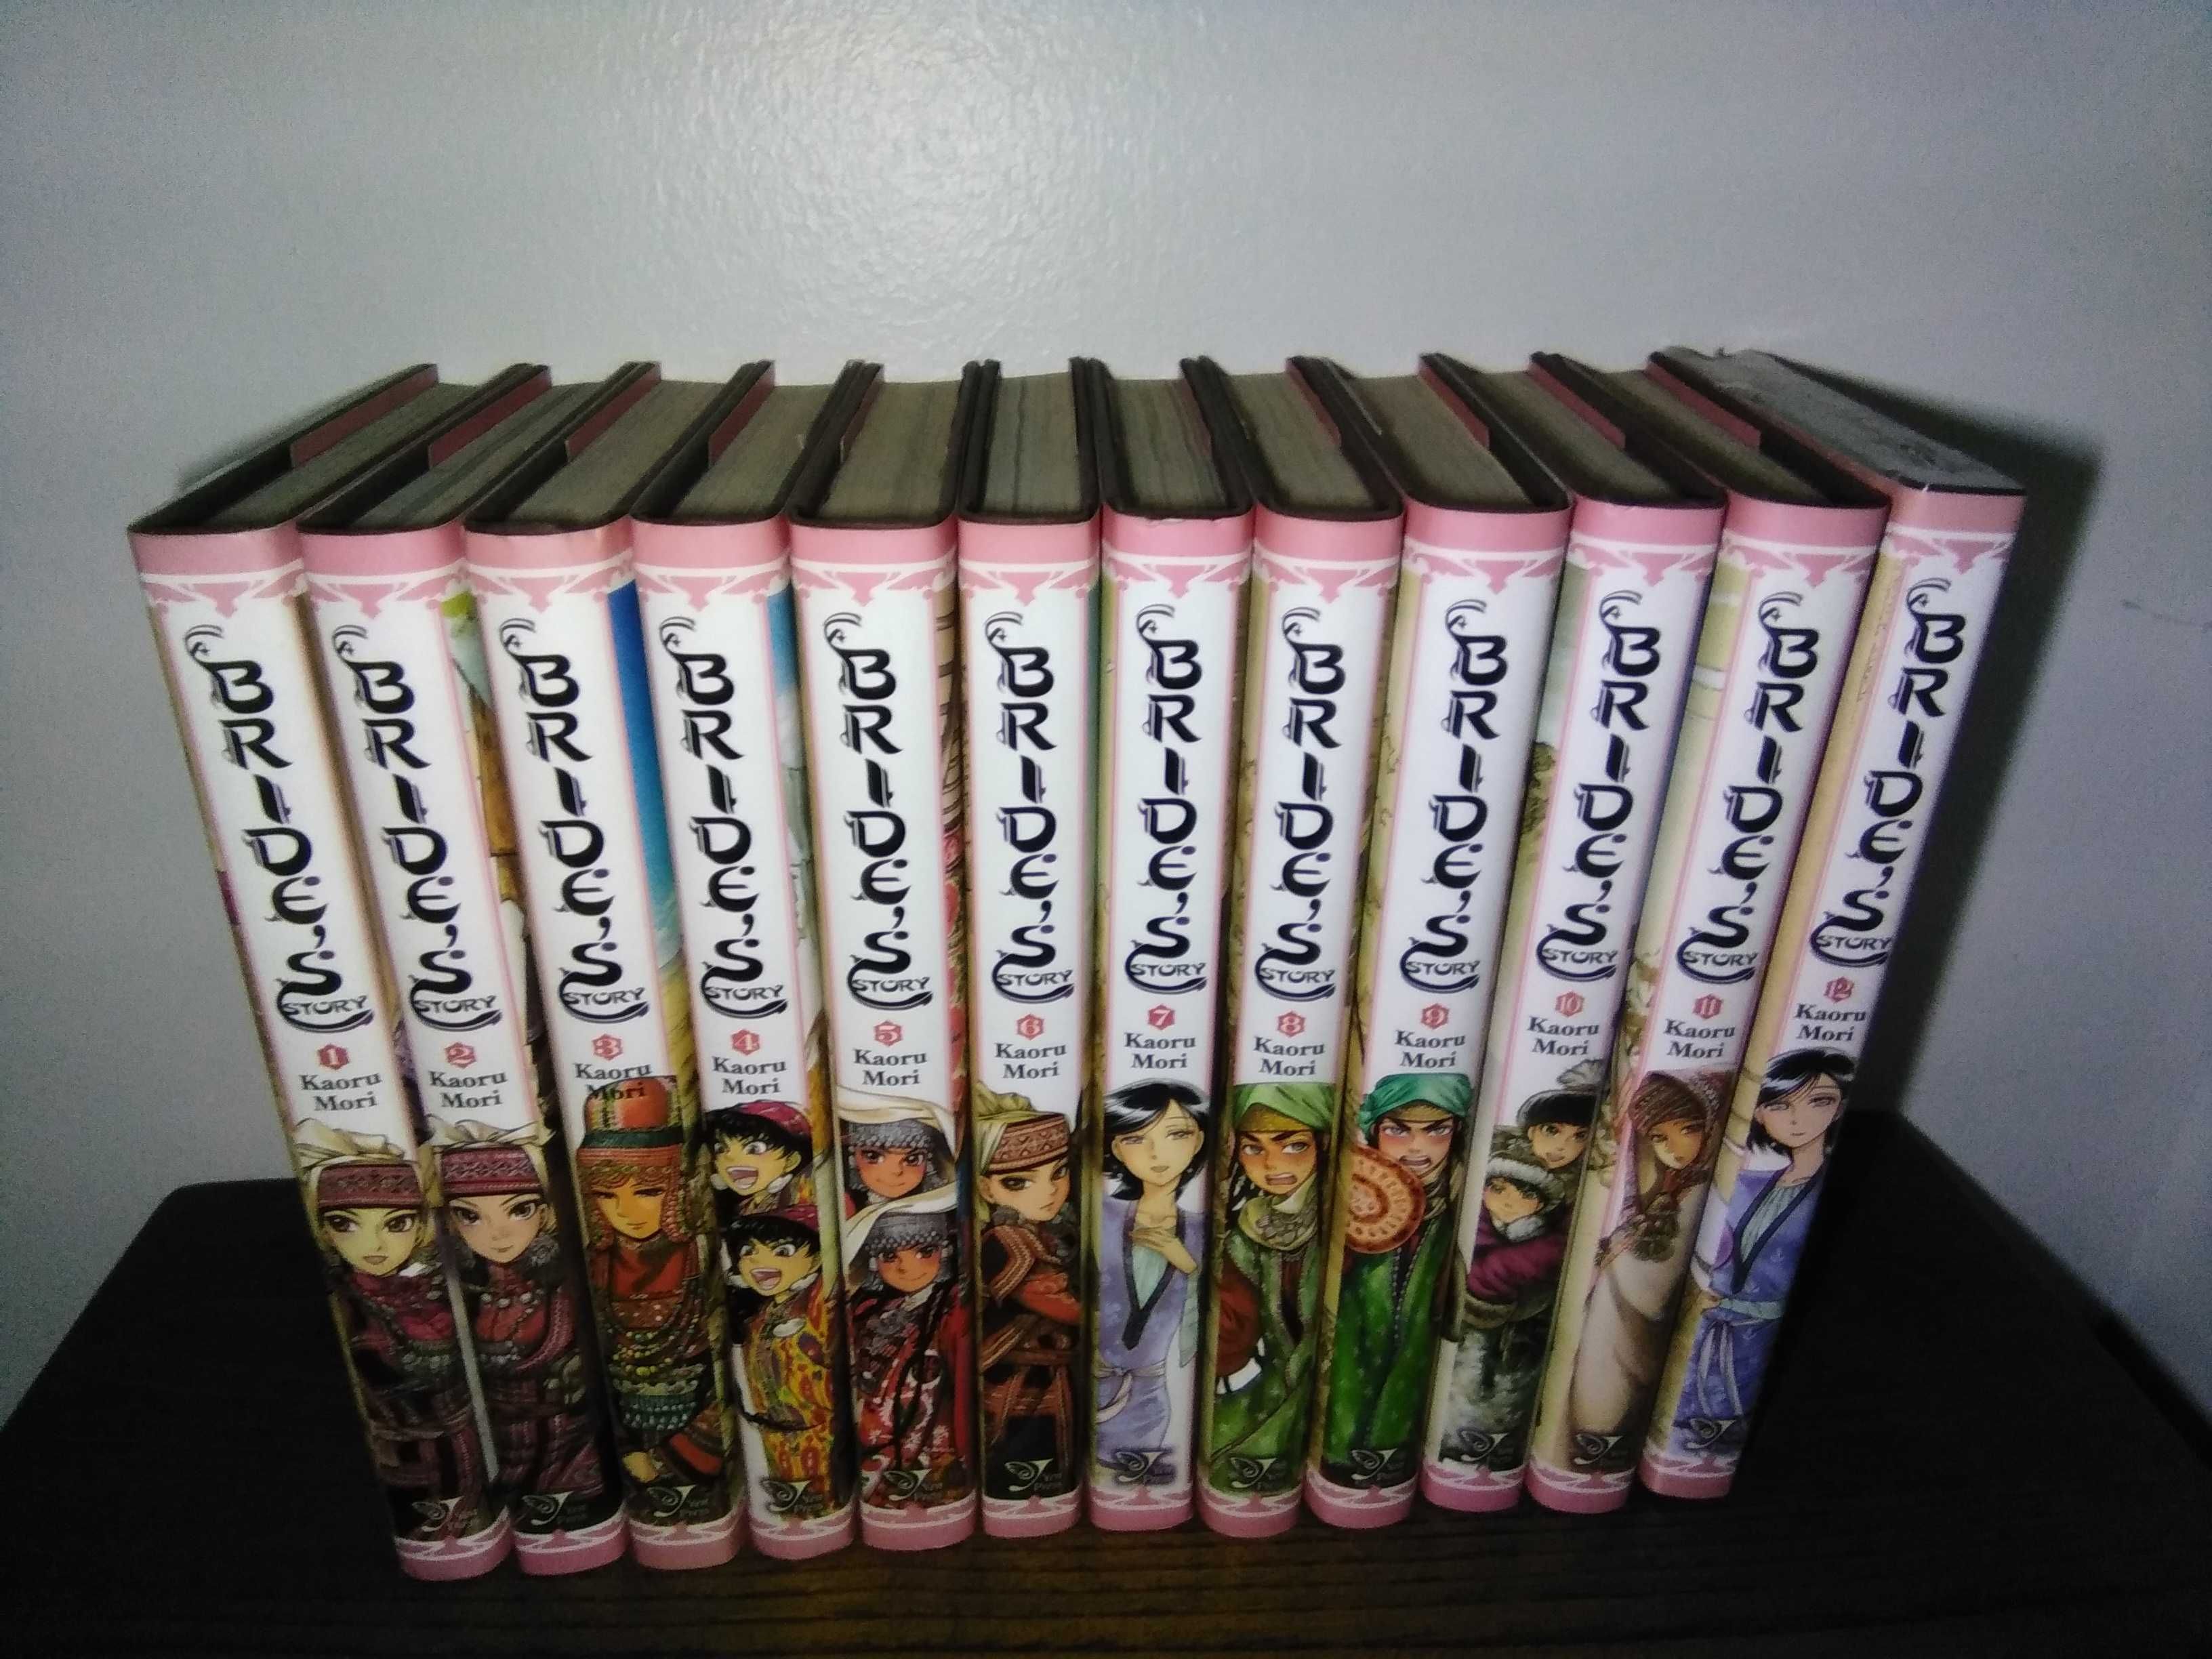 A Bride's Story 12 volumes